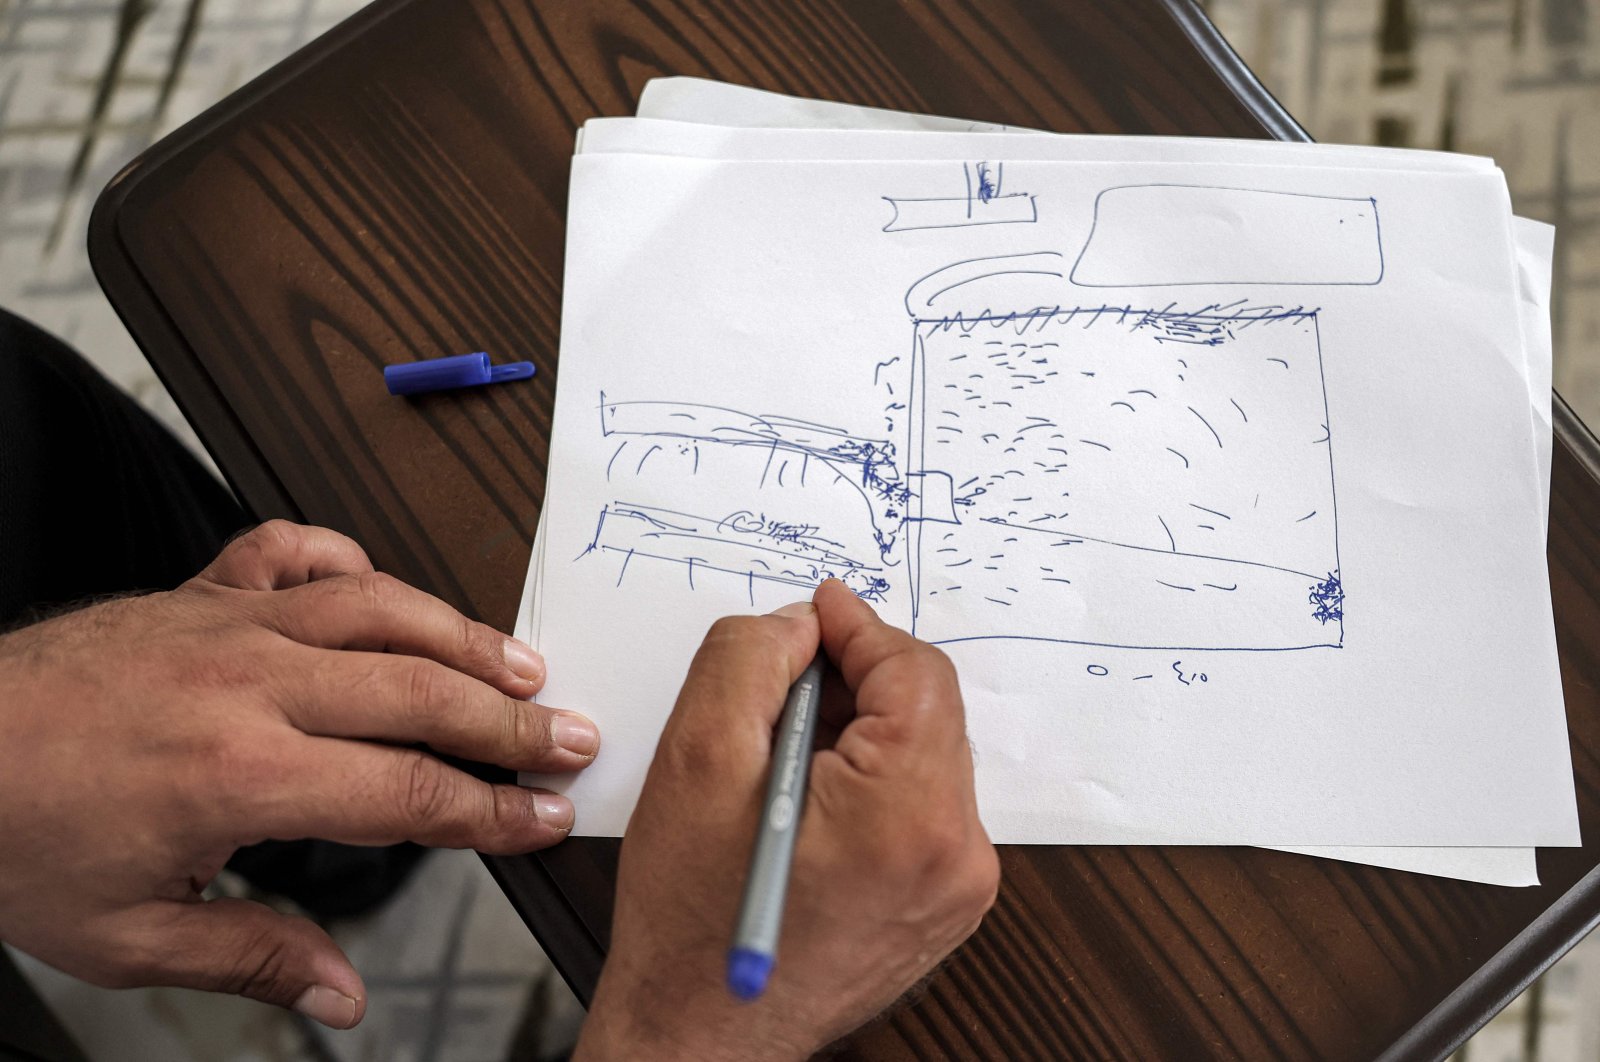 Mutassem Abd al-Sater, a 42-year-old former inmate of Sednaya prison, draws a rudimentary sketch of the prison plan during an interview at his house in Reyhanlı in Türkiye&#039;s southern Hatay province near the border with Syria, Aug. 10, 2022. (AFP Photo)